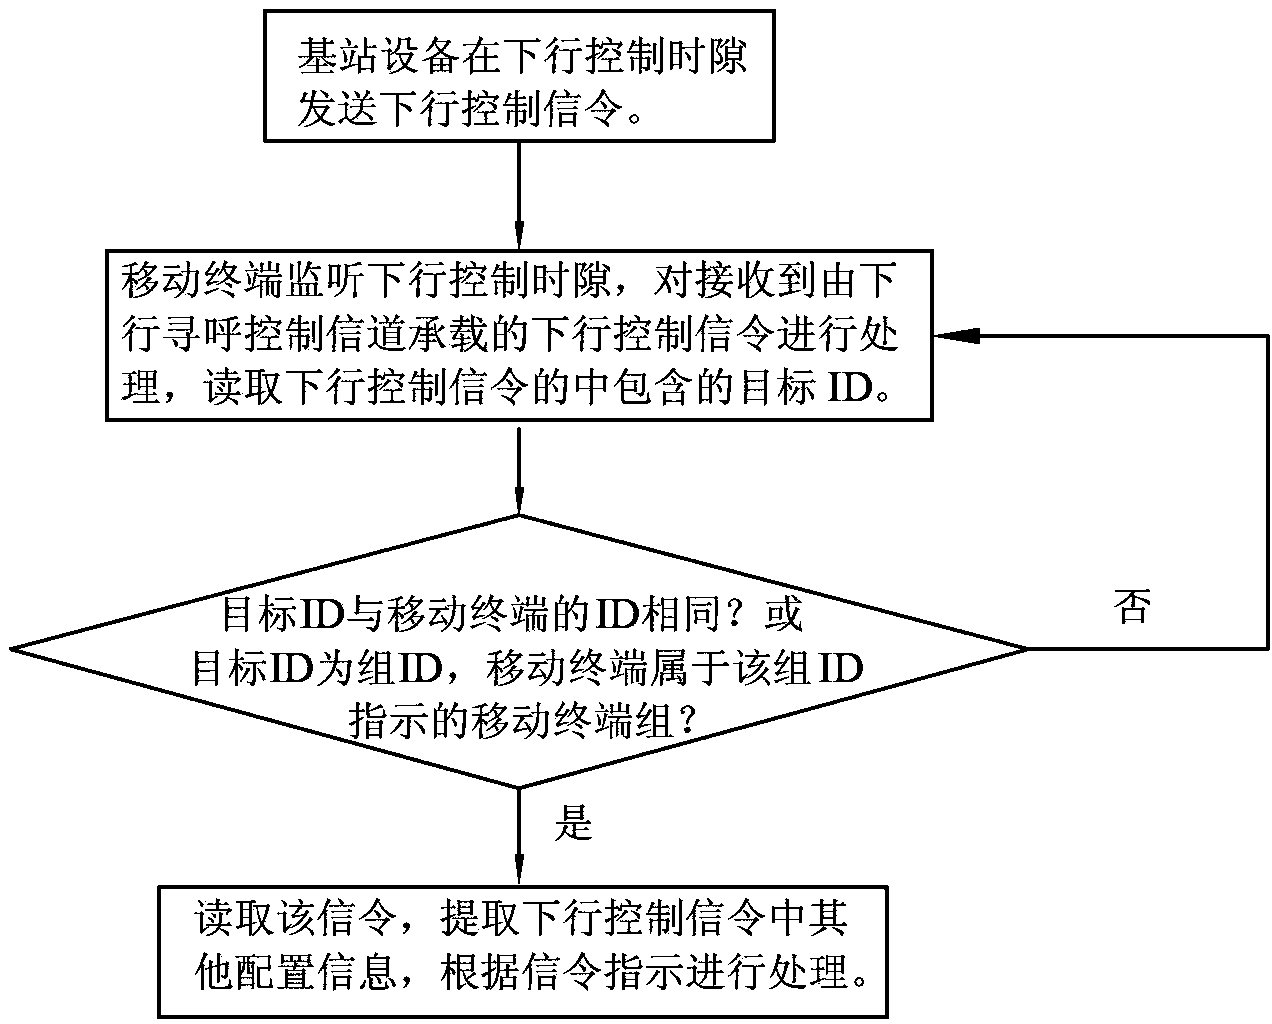 Downlink control signal transmitting method for TDMA mobile communication systems and application thereof